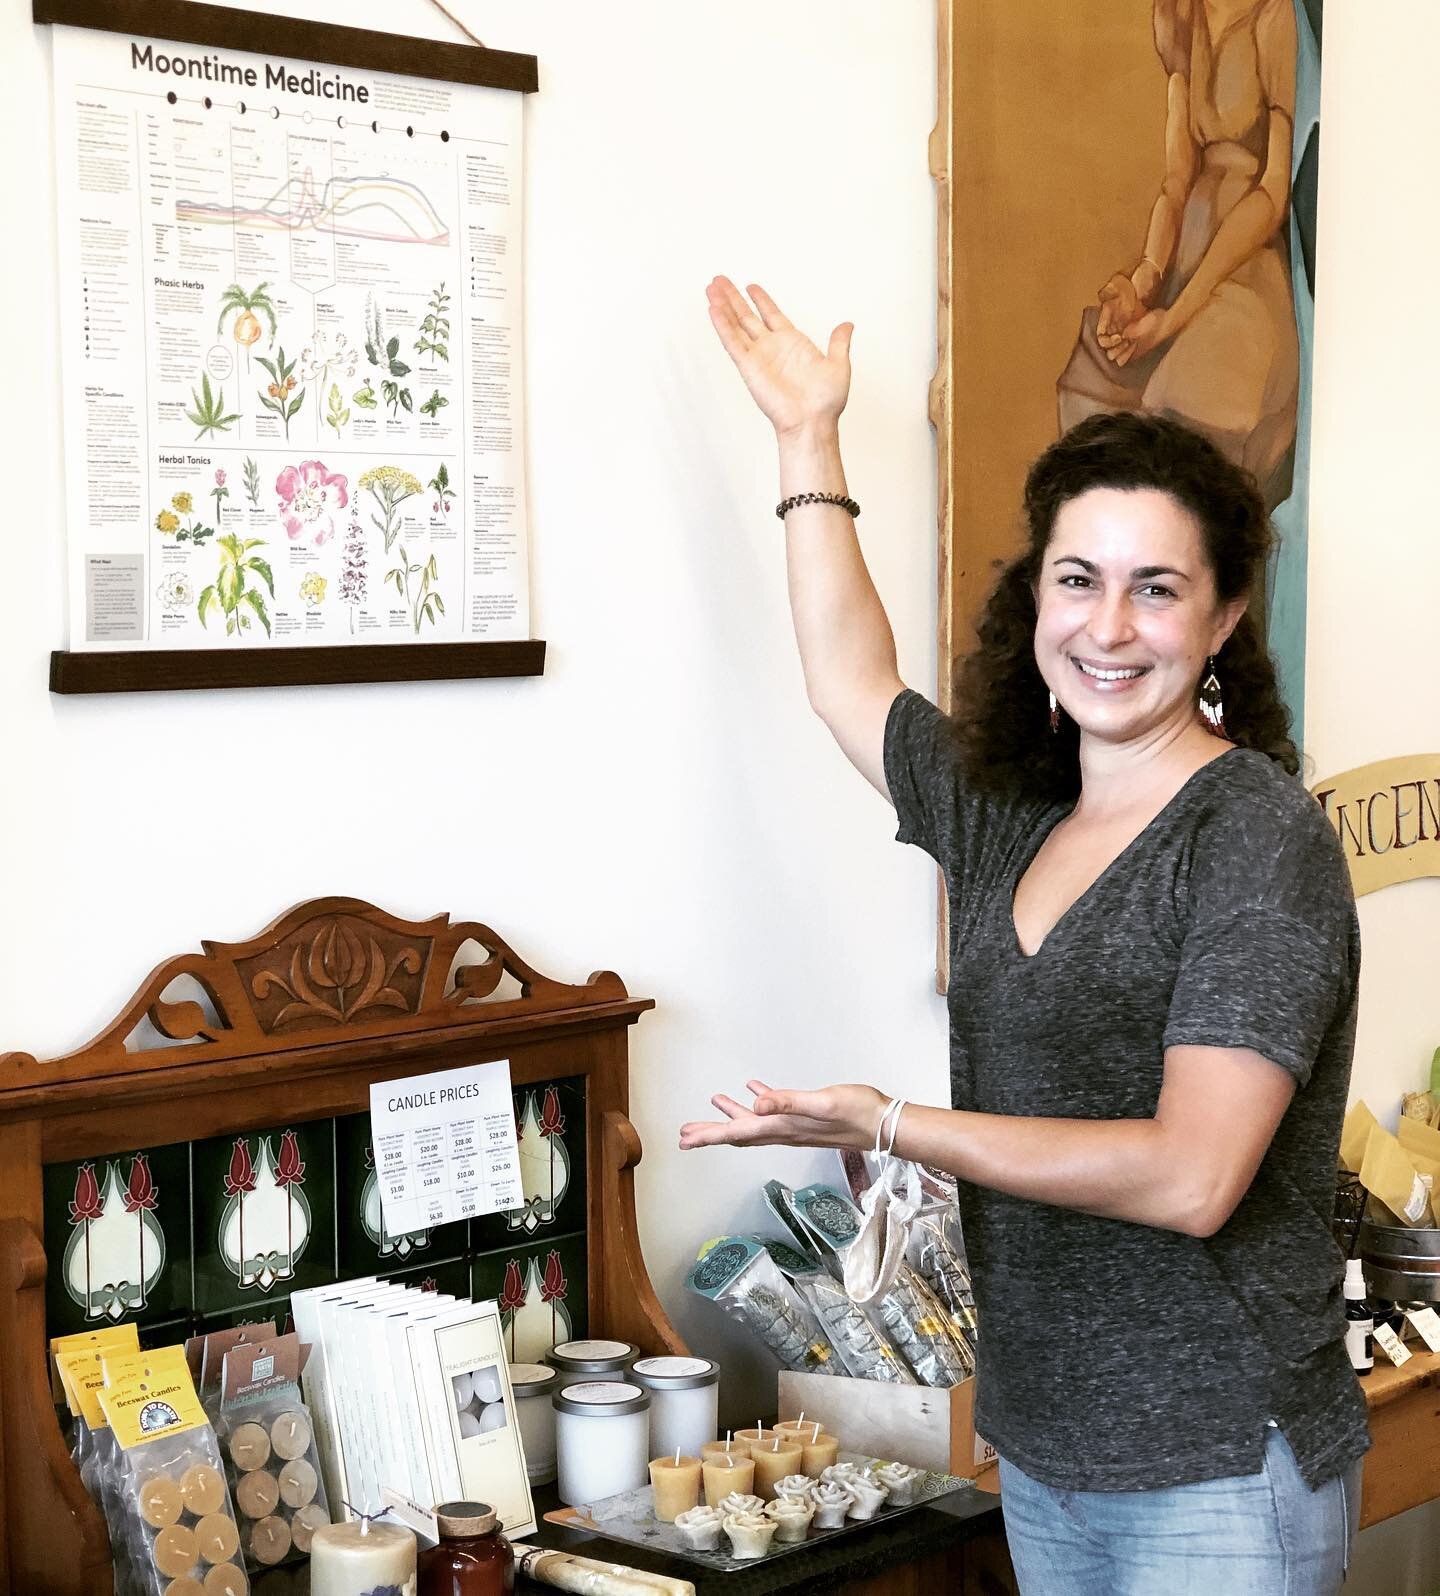 The Moontime Medicine Guide is now available at @RosemarysGarden72 in @Sebastopol! It is such an honor to have the guide hanging in this herbal shop that is full of beautiful art, herbal potions, and all my favorite herbal allies. I don&rsquo;t think